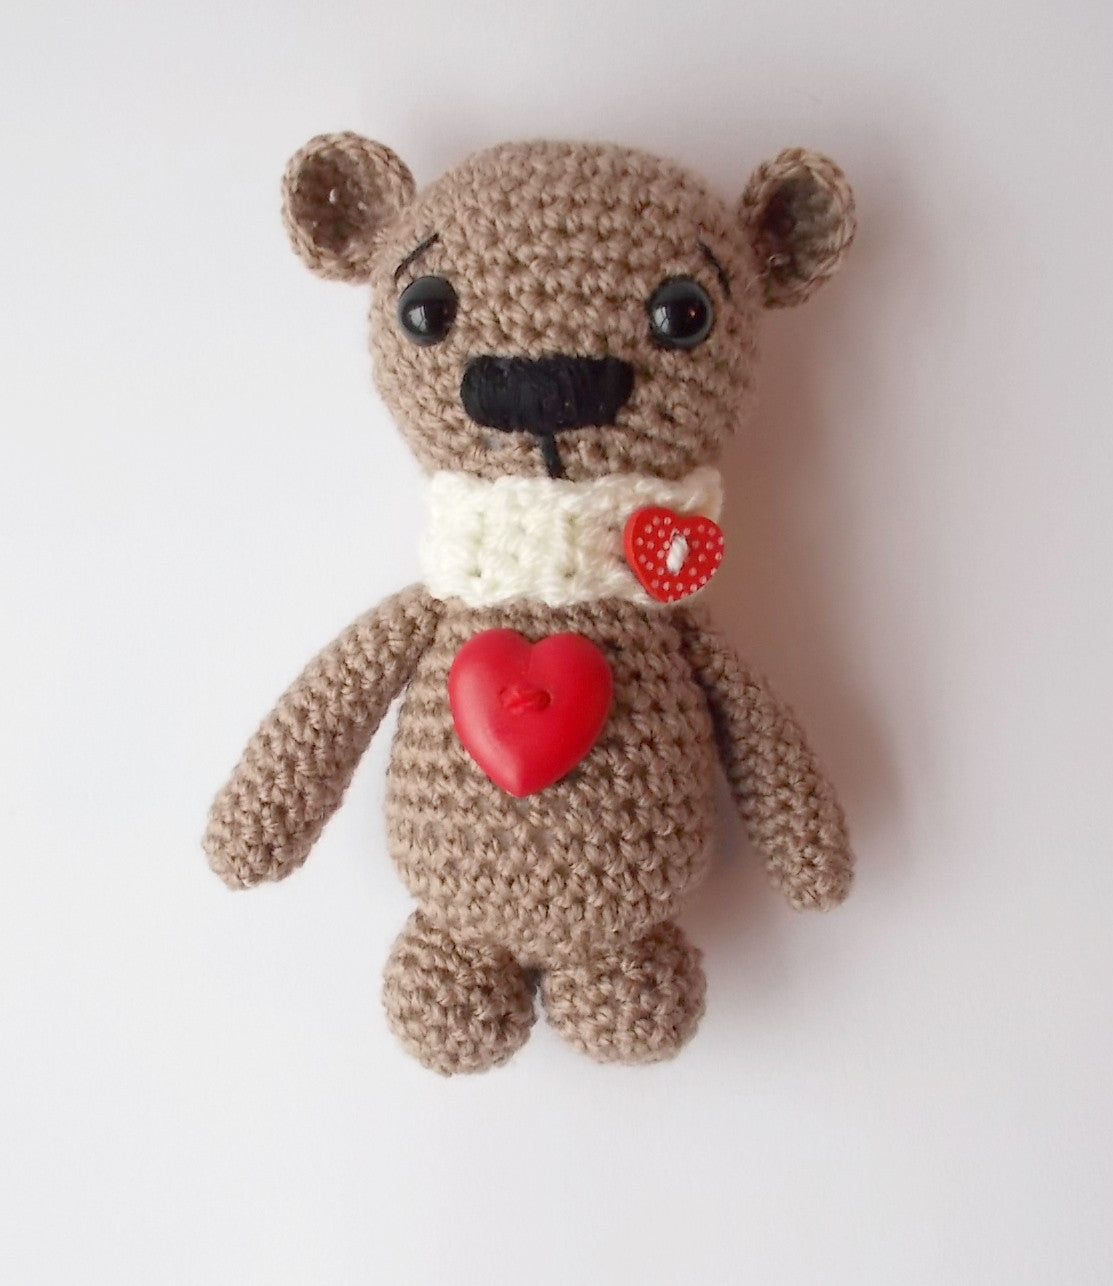 GUEST BLOG: Using the Crochet Project Bible to create a Amigurumi Valentine bear